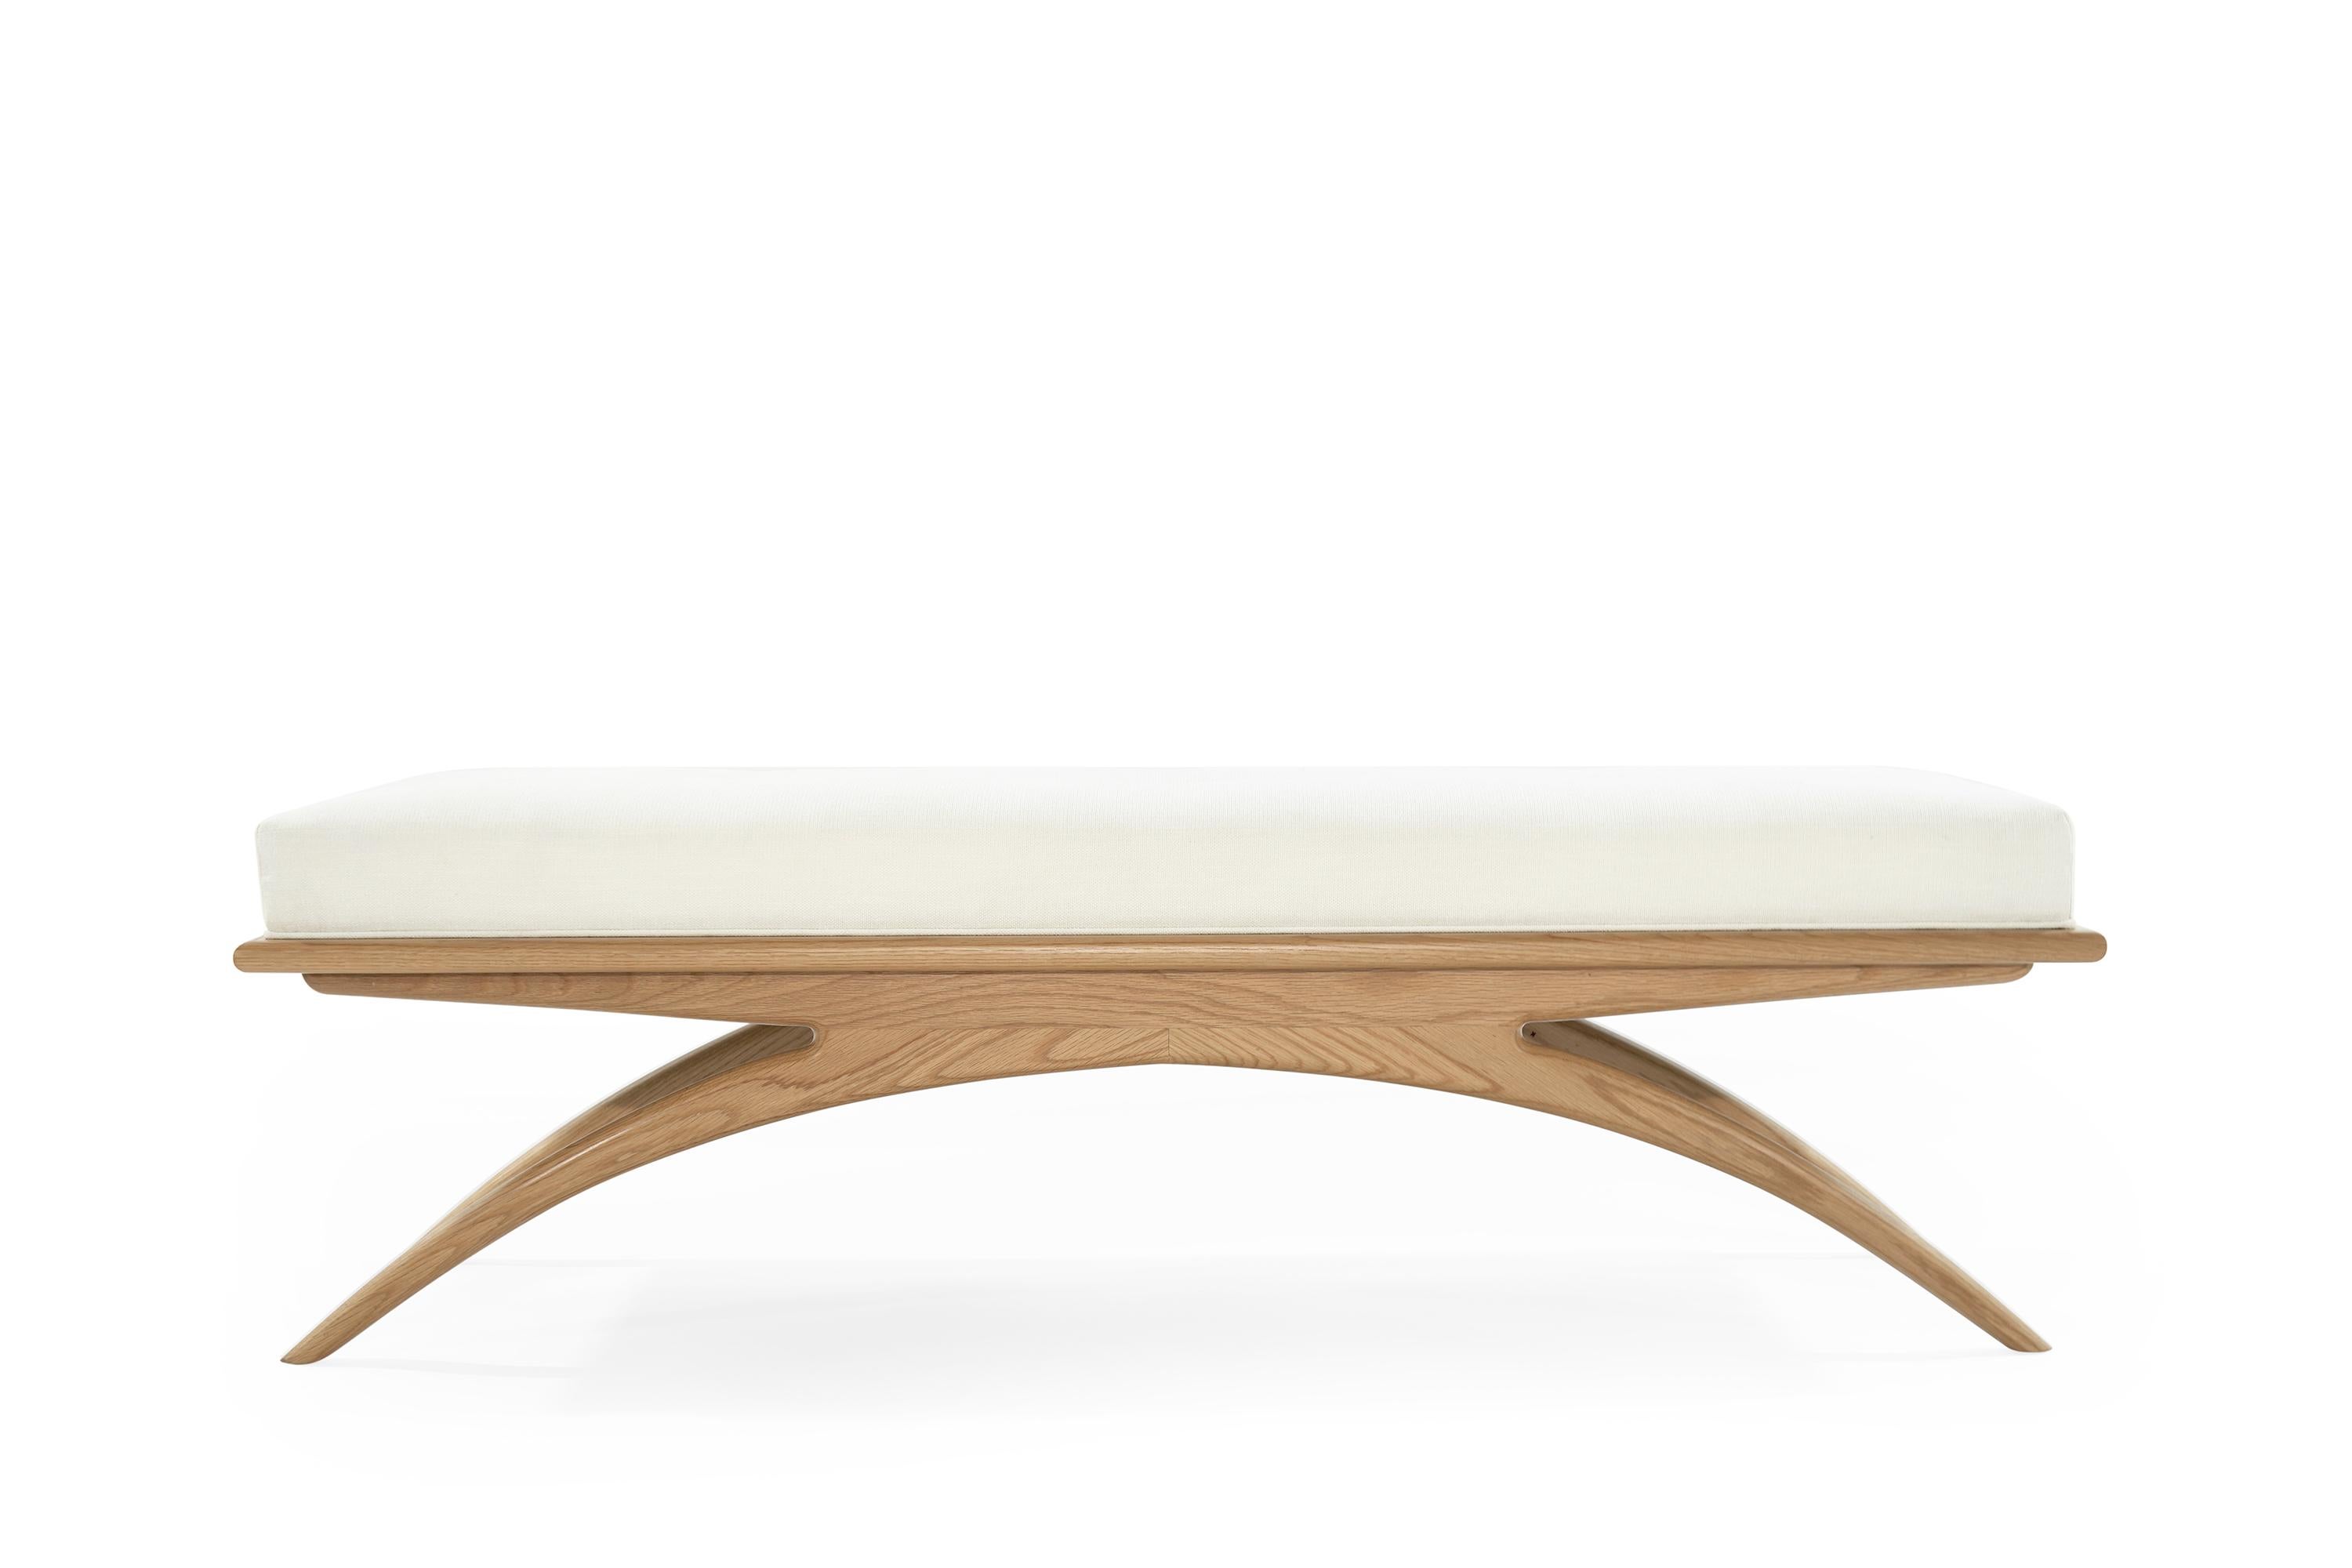 Artfully balanced. This handcrafted bench has a lightweight aesthetic with solid construction. The prim, rectangular cushion is beautifully upholstered in linen, resting delicately on a solid oak base. Elevate your space with sloping curves inspired